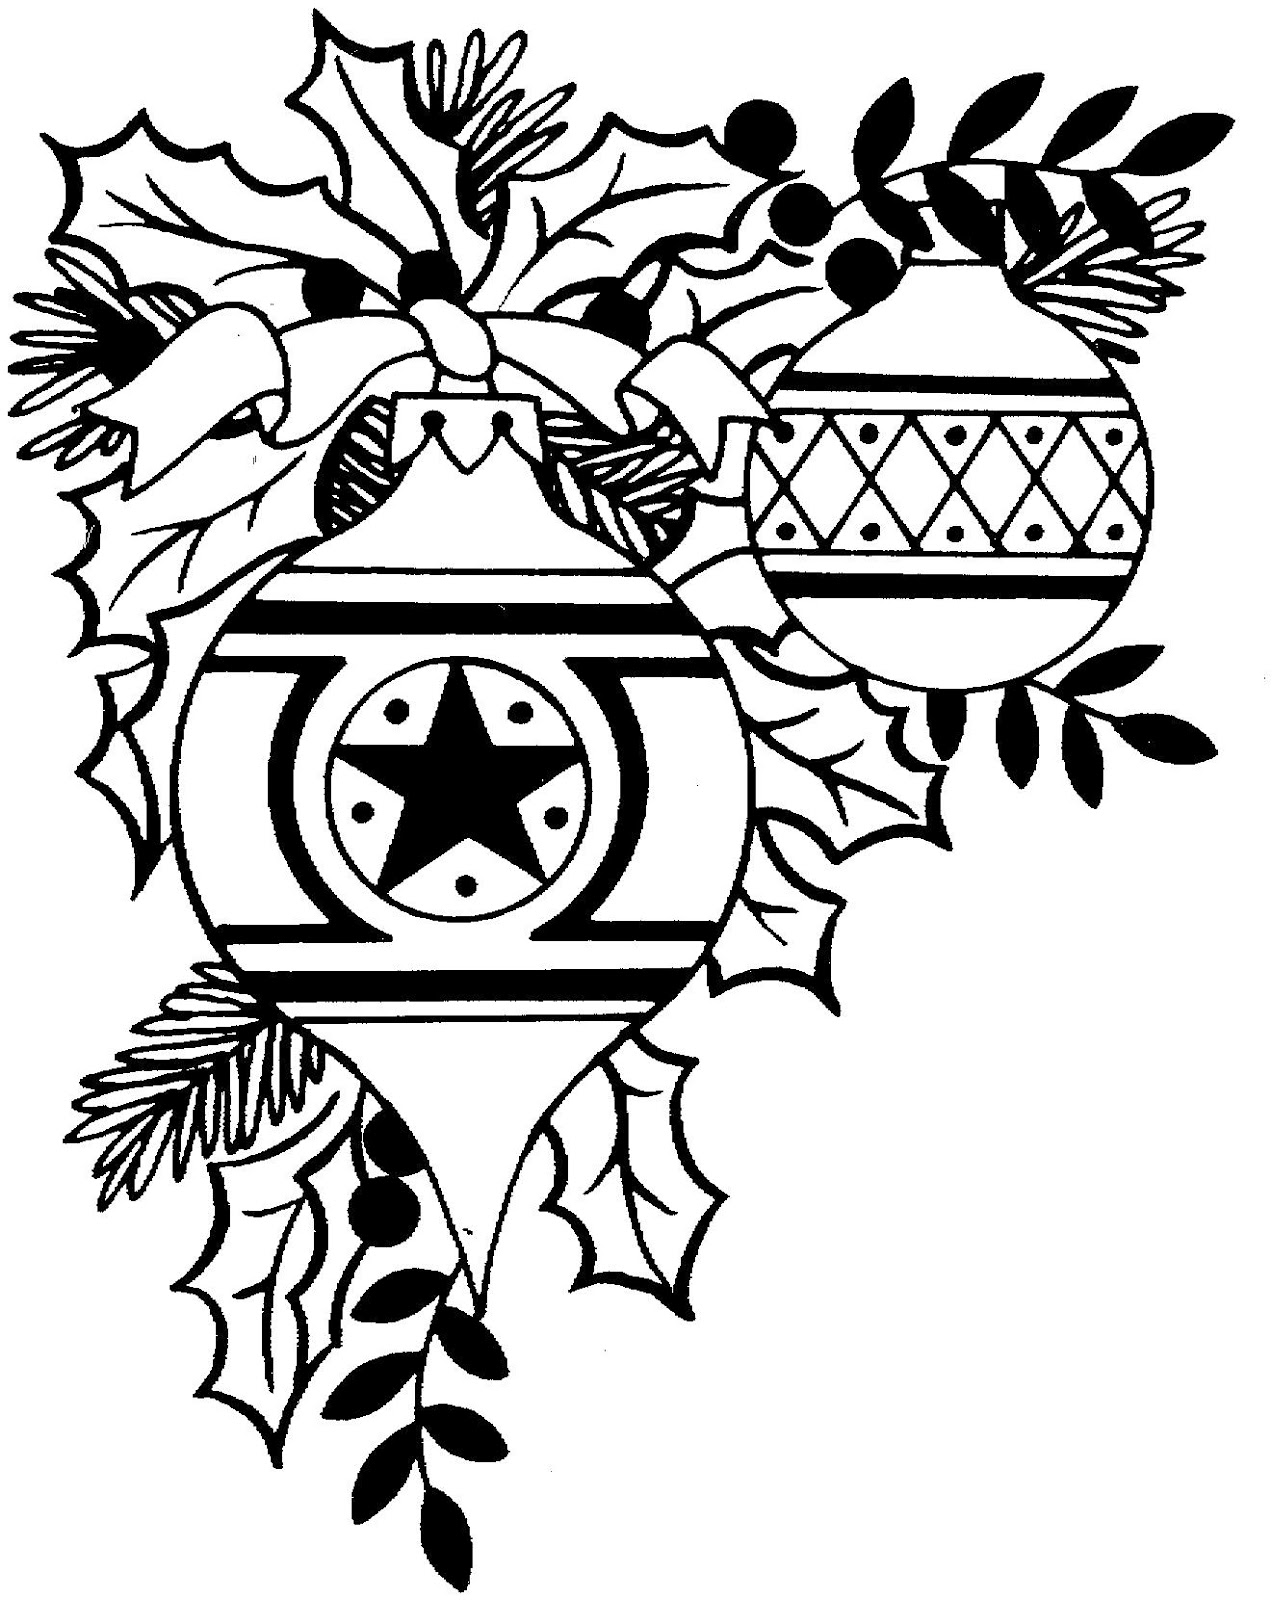 and Black christmas trees . - Black And White Christmas Clip Art